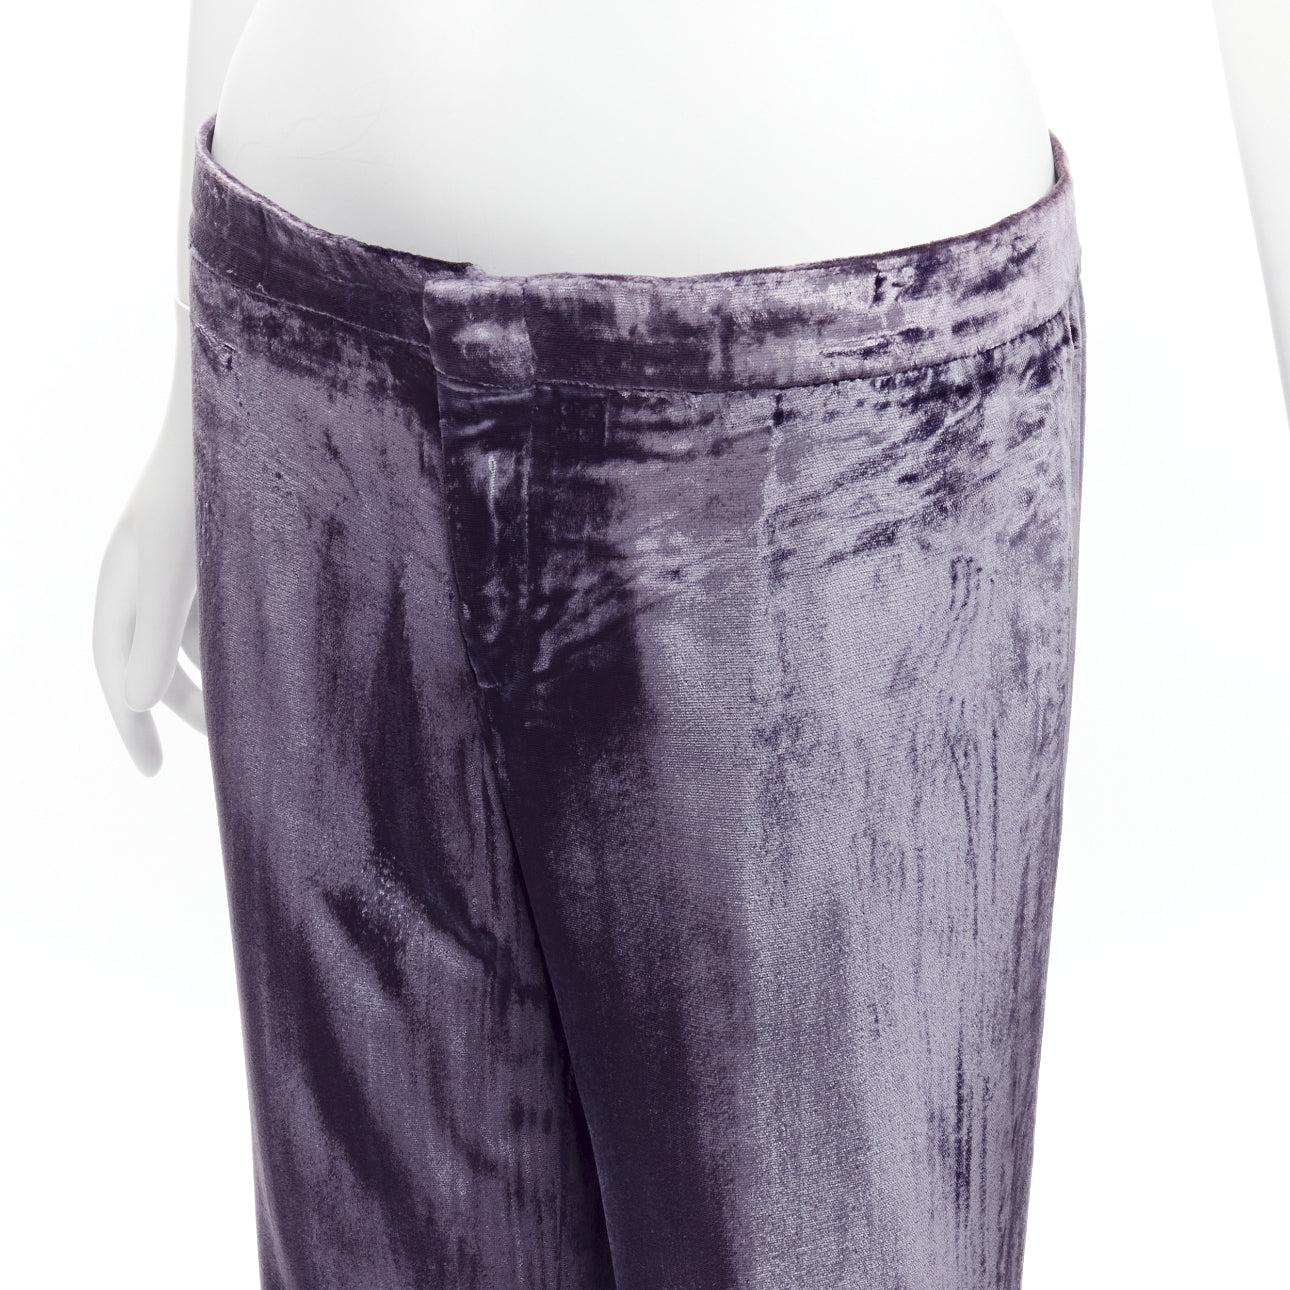 GUCCI Tom Ford Vintage purple velvet low waist flared pants IT40 S
Reference: GIYG/A00355
Brand: Gucci
Designer: Tom Ford
Material: Rayon, Silk
Color: Purple
Pattern: Solid
Closure: Zip Fly
Lining: Black Fabric
Made in: Italy

CONDITION:
Condition: